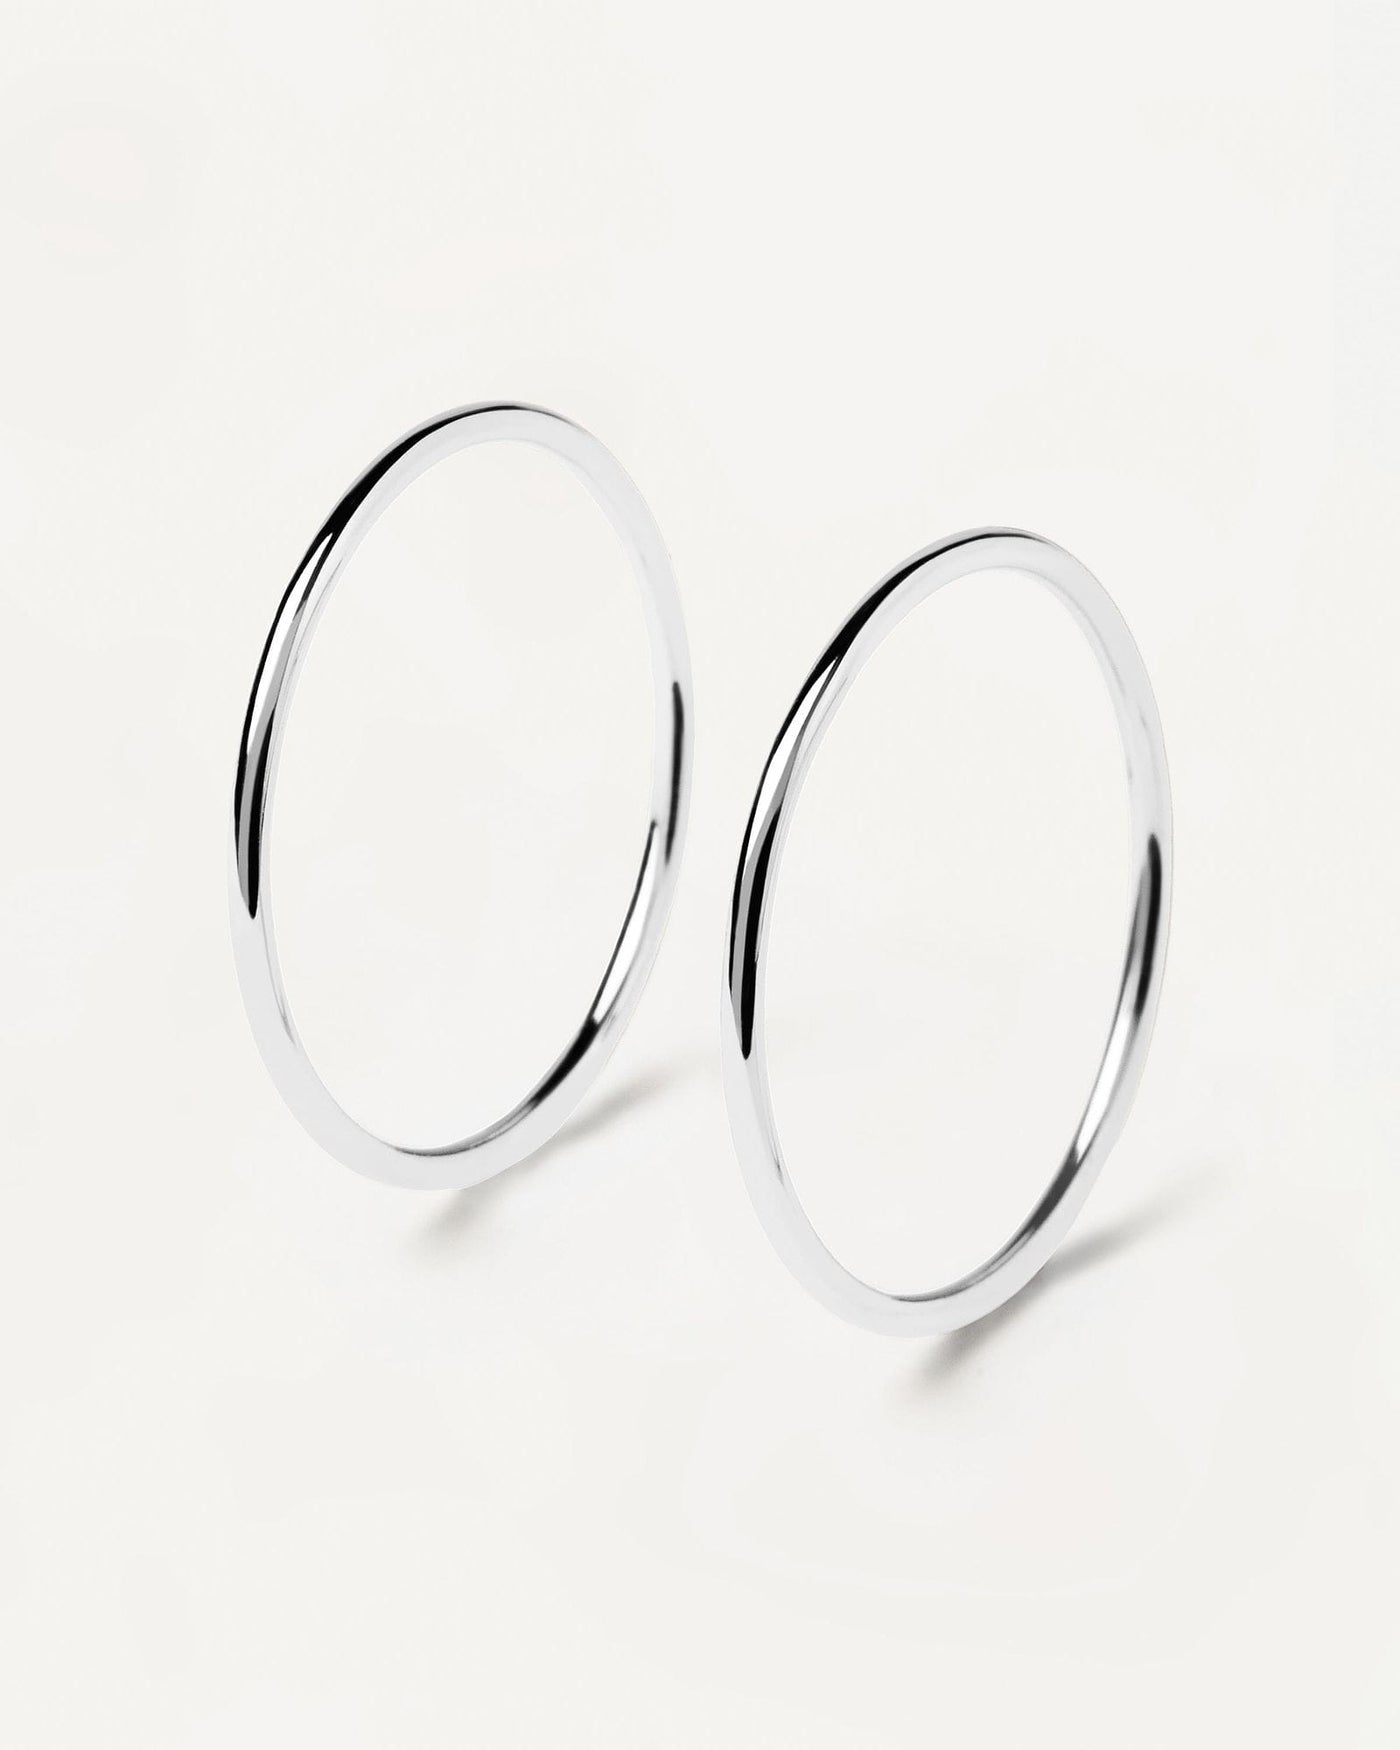 2024 Selection | Twin Silver Rings. Pair of stackable 925 sterling silver rings . Get the latest arrival from PDPAOLA. Place your order safely and get this Best Seller. Free Shipping.